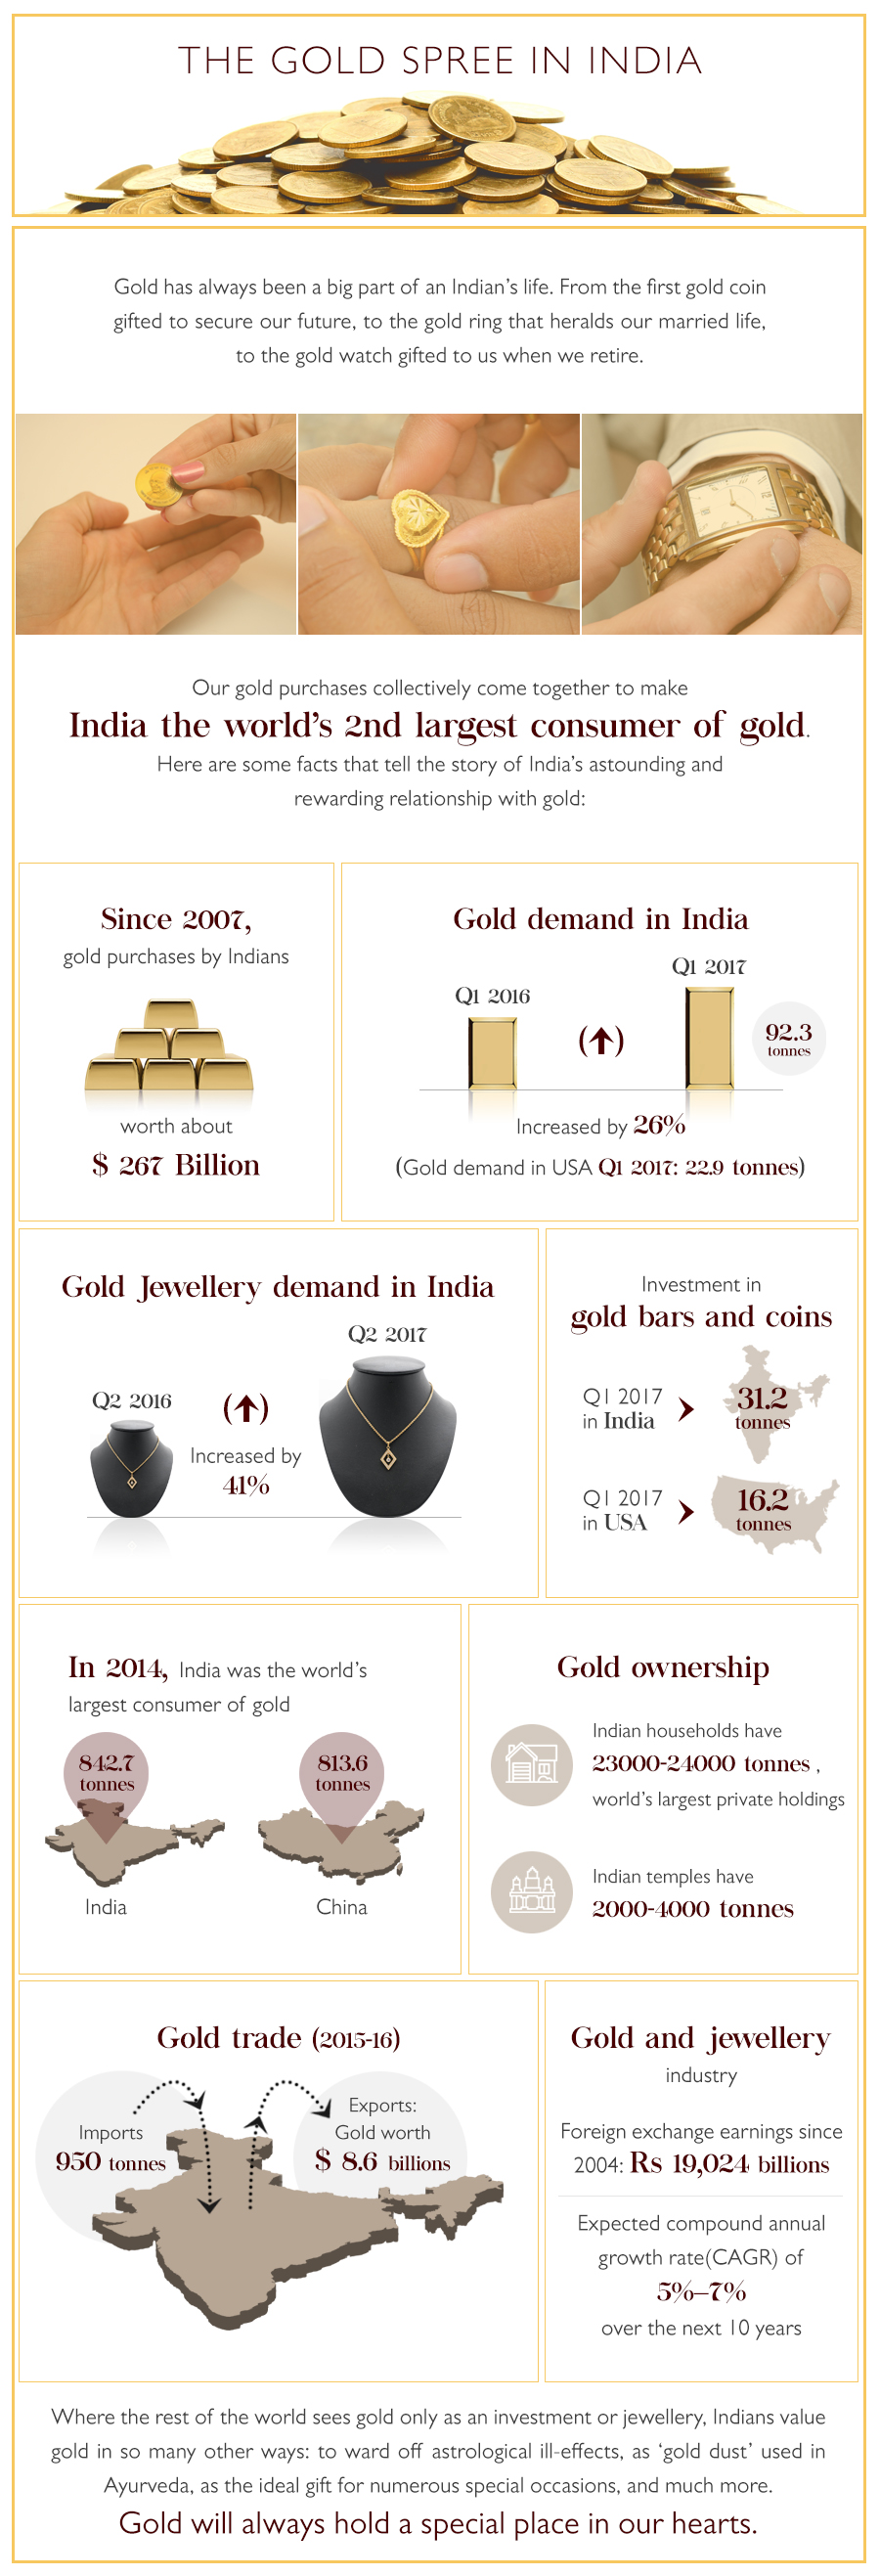 India is world's 2nd largest consumer of gold. Here are some facts about the gold buying behaviour among Indians and demand pattern across various gold products like gold jewellery, gold coins & more.